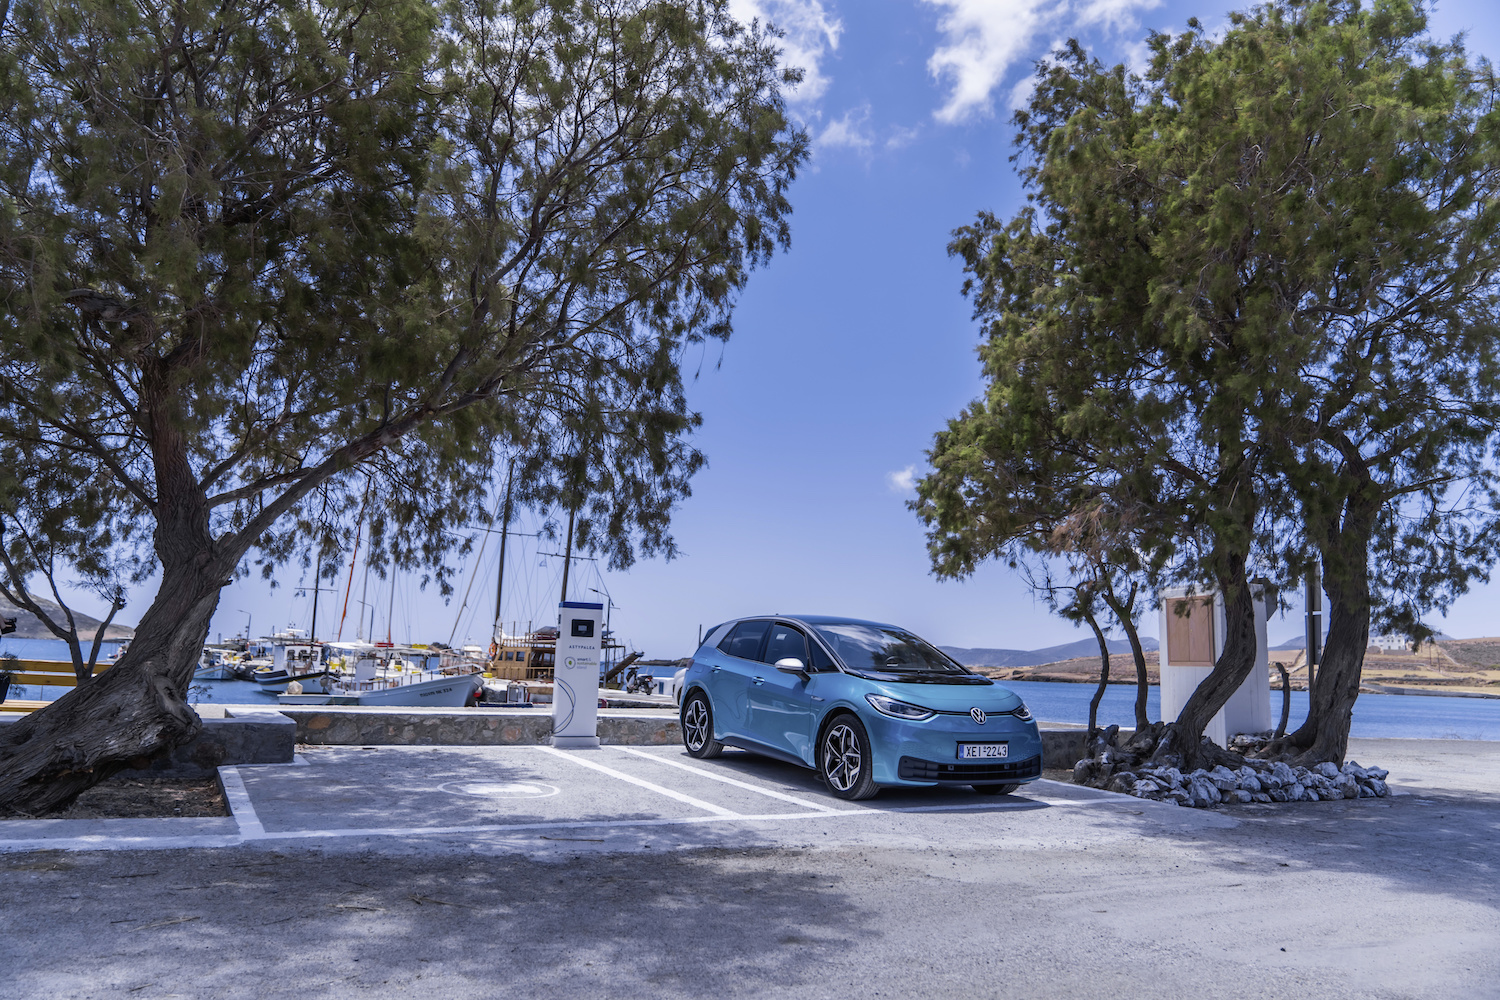 A turquoise Volkswagen ID.4 EV parked in front of the harbor of a greek island.